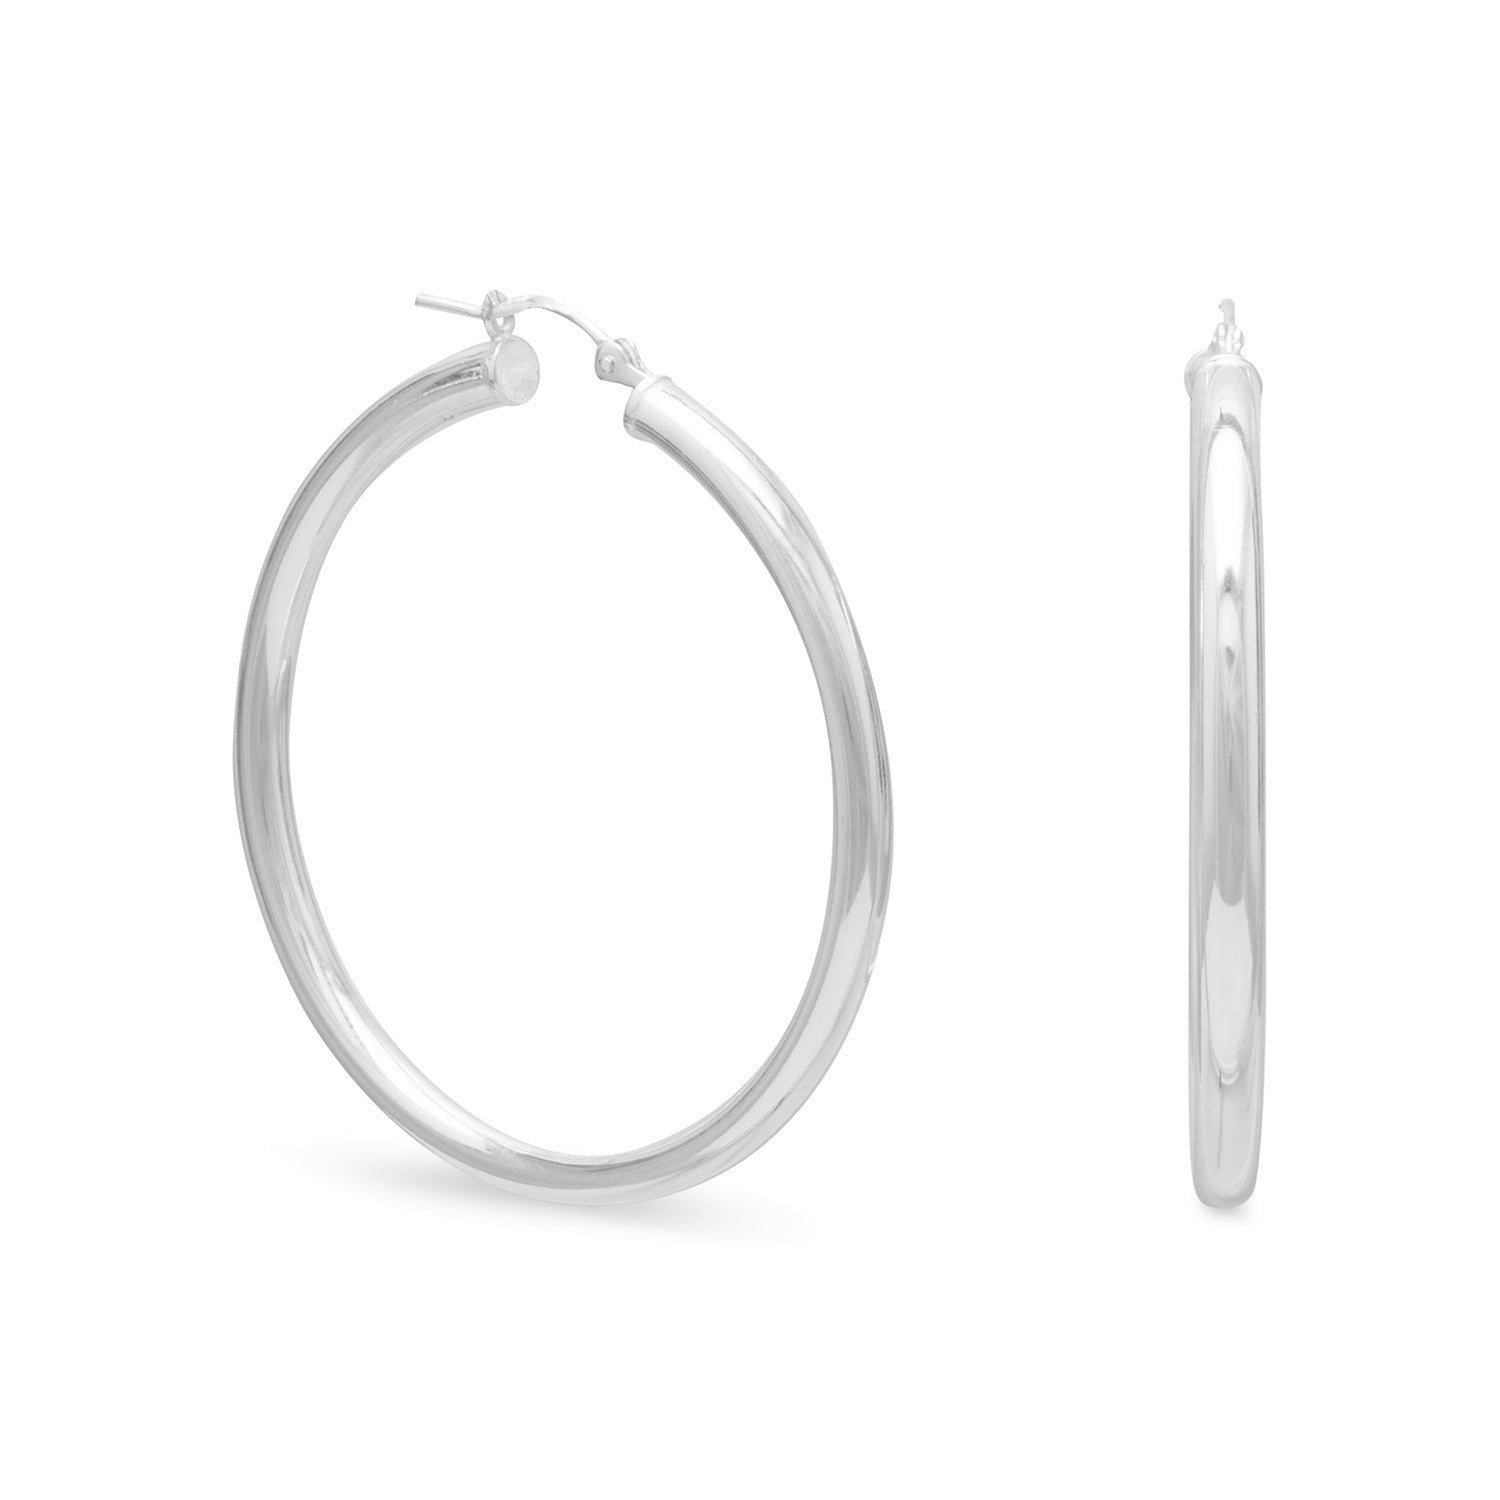 3mm x 40mm Hoop Earrings with Click